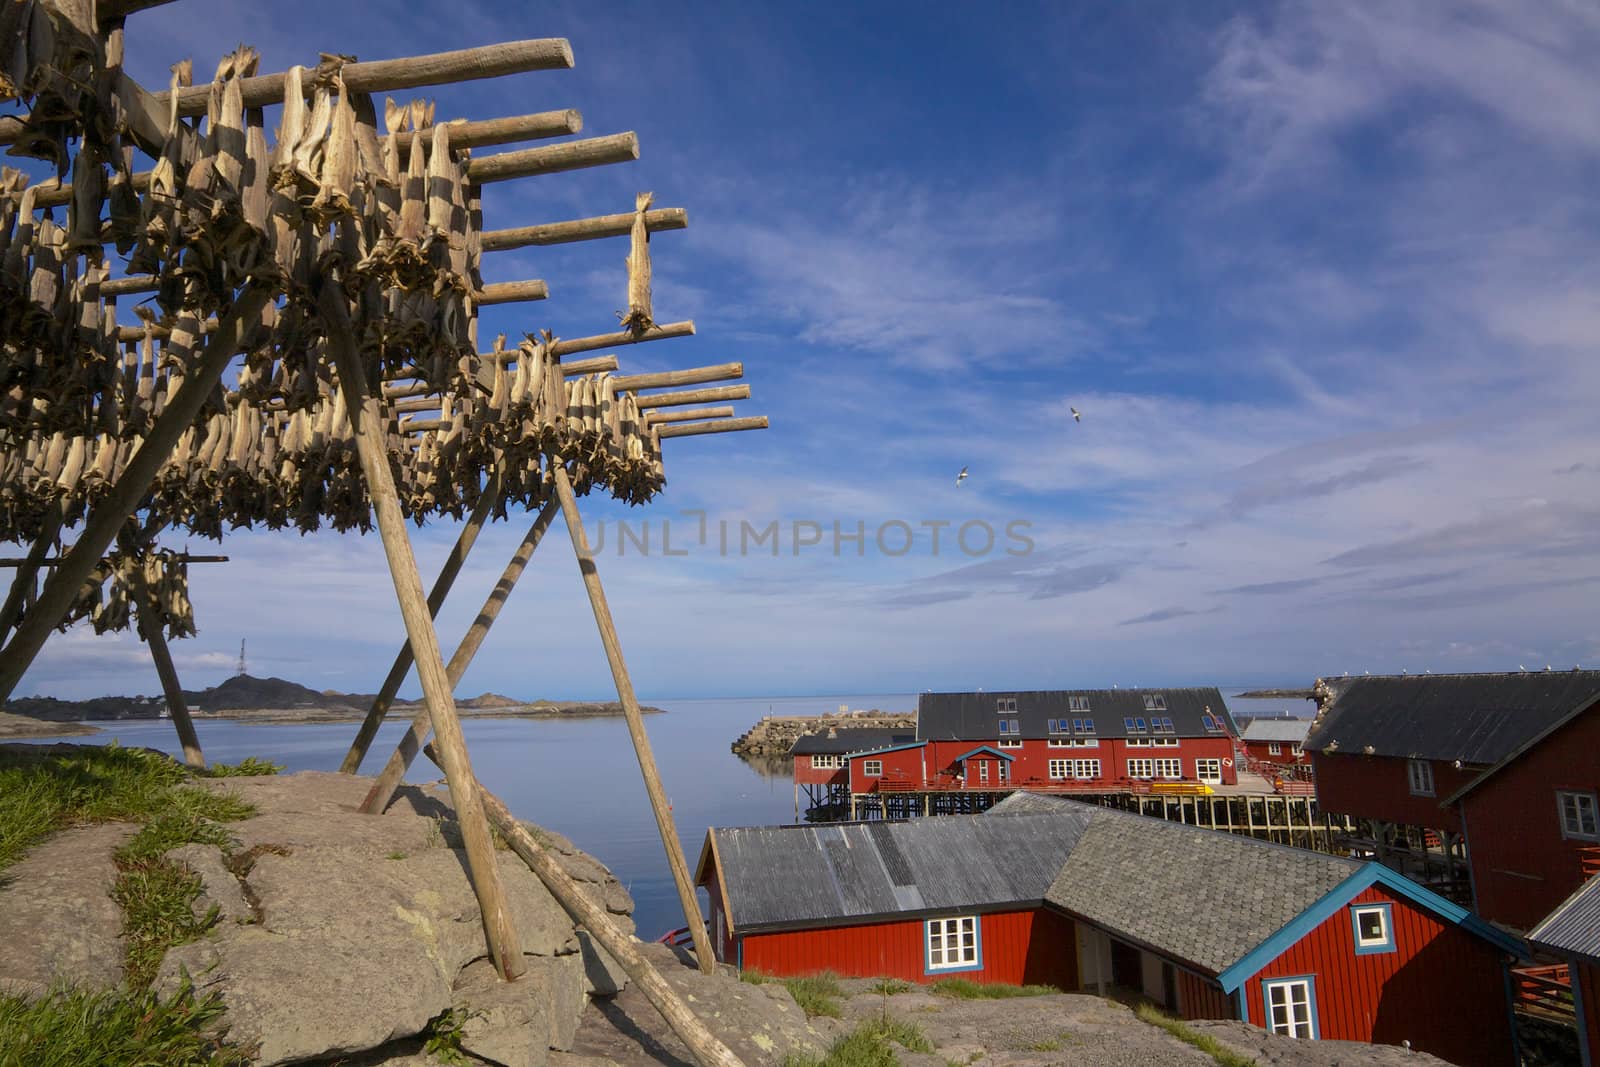 drying stockfish in traditional way on Lofoten islands with red fishing rorbu huts by the fjord